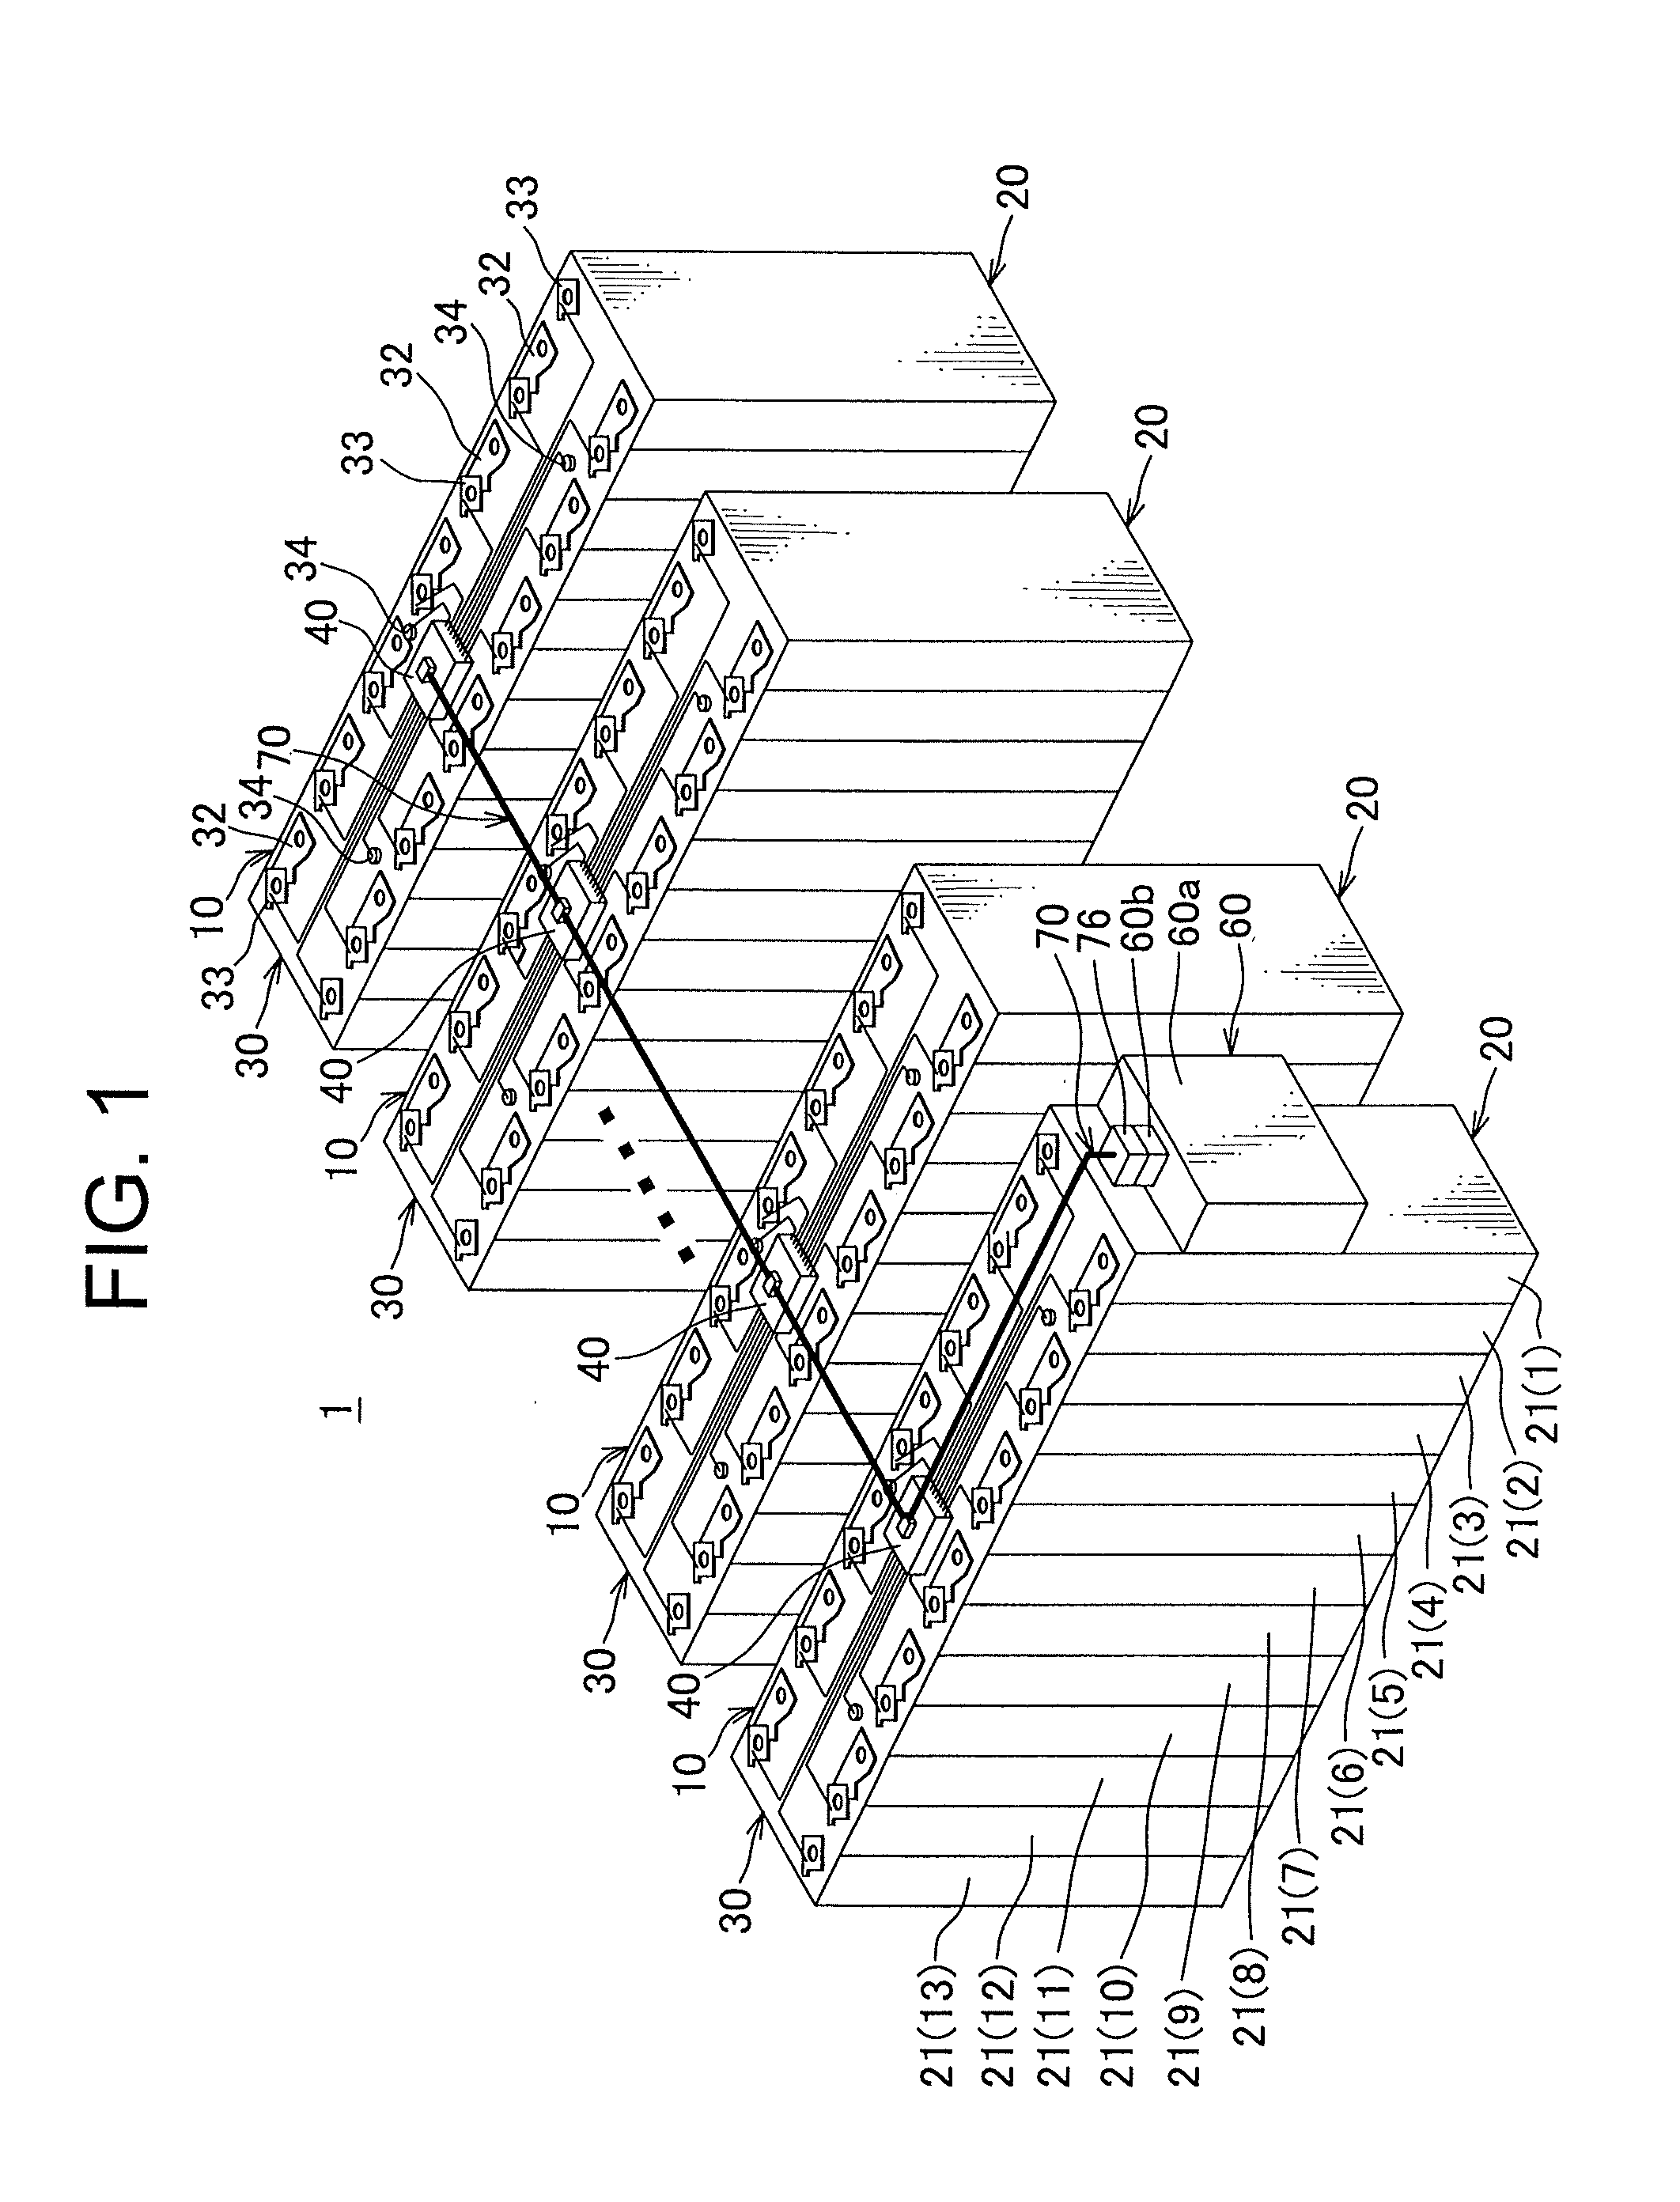 Battery state notifying unit, bus bar module, battery pack, and battery state monitoring system